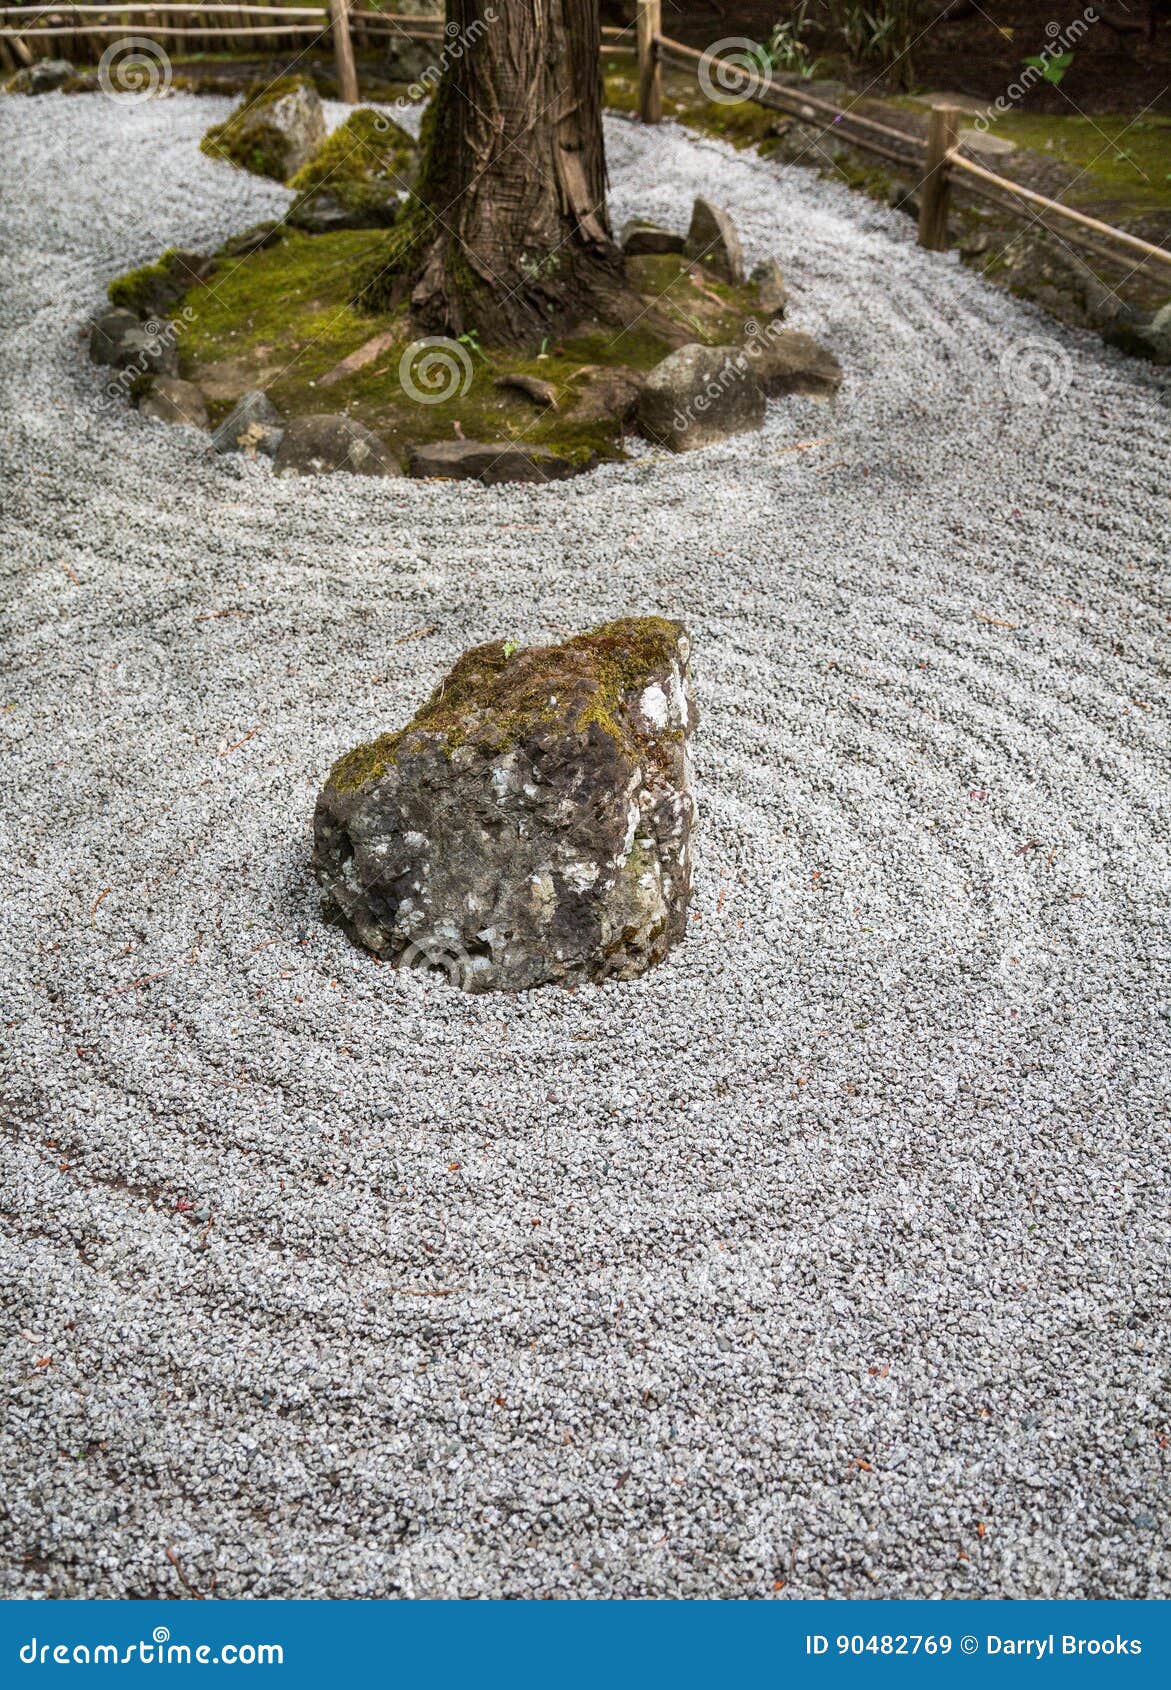 Raked Sand in Japanese Garden Stock Image Image park, simplicity: 90482769